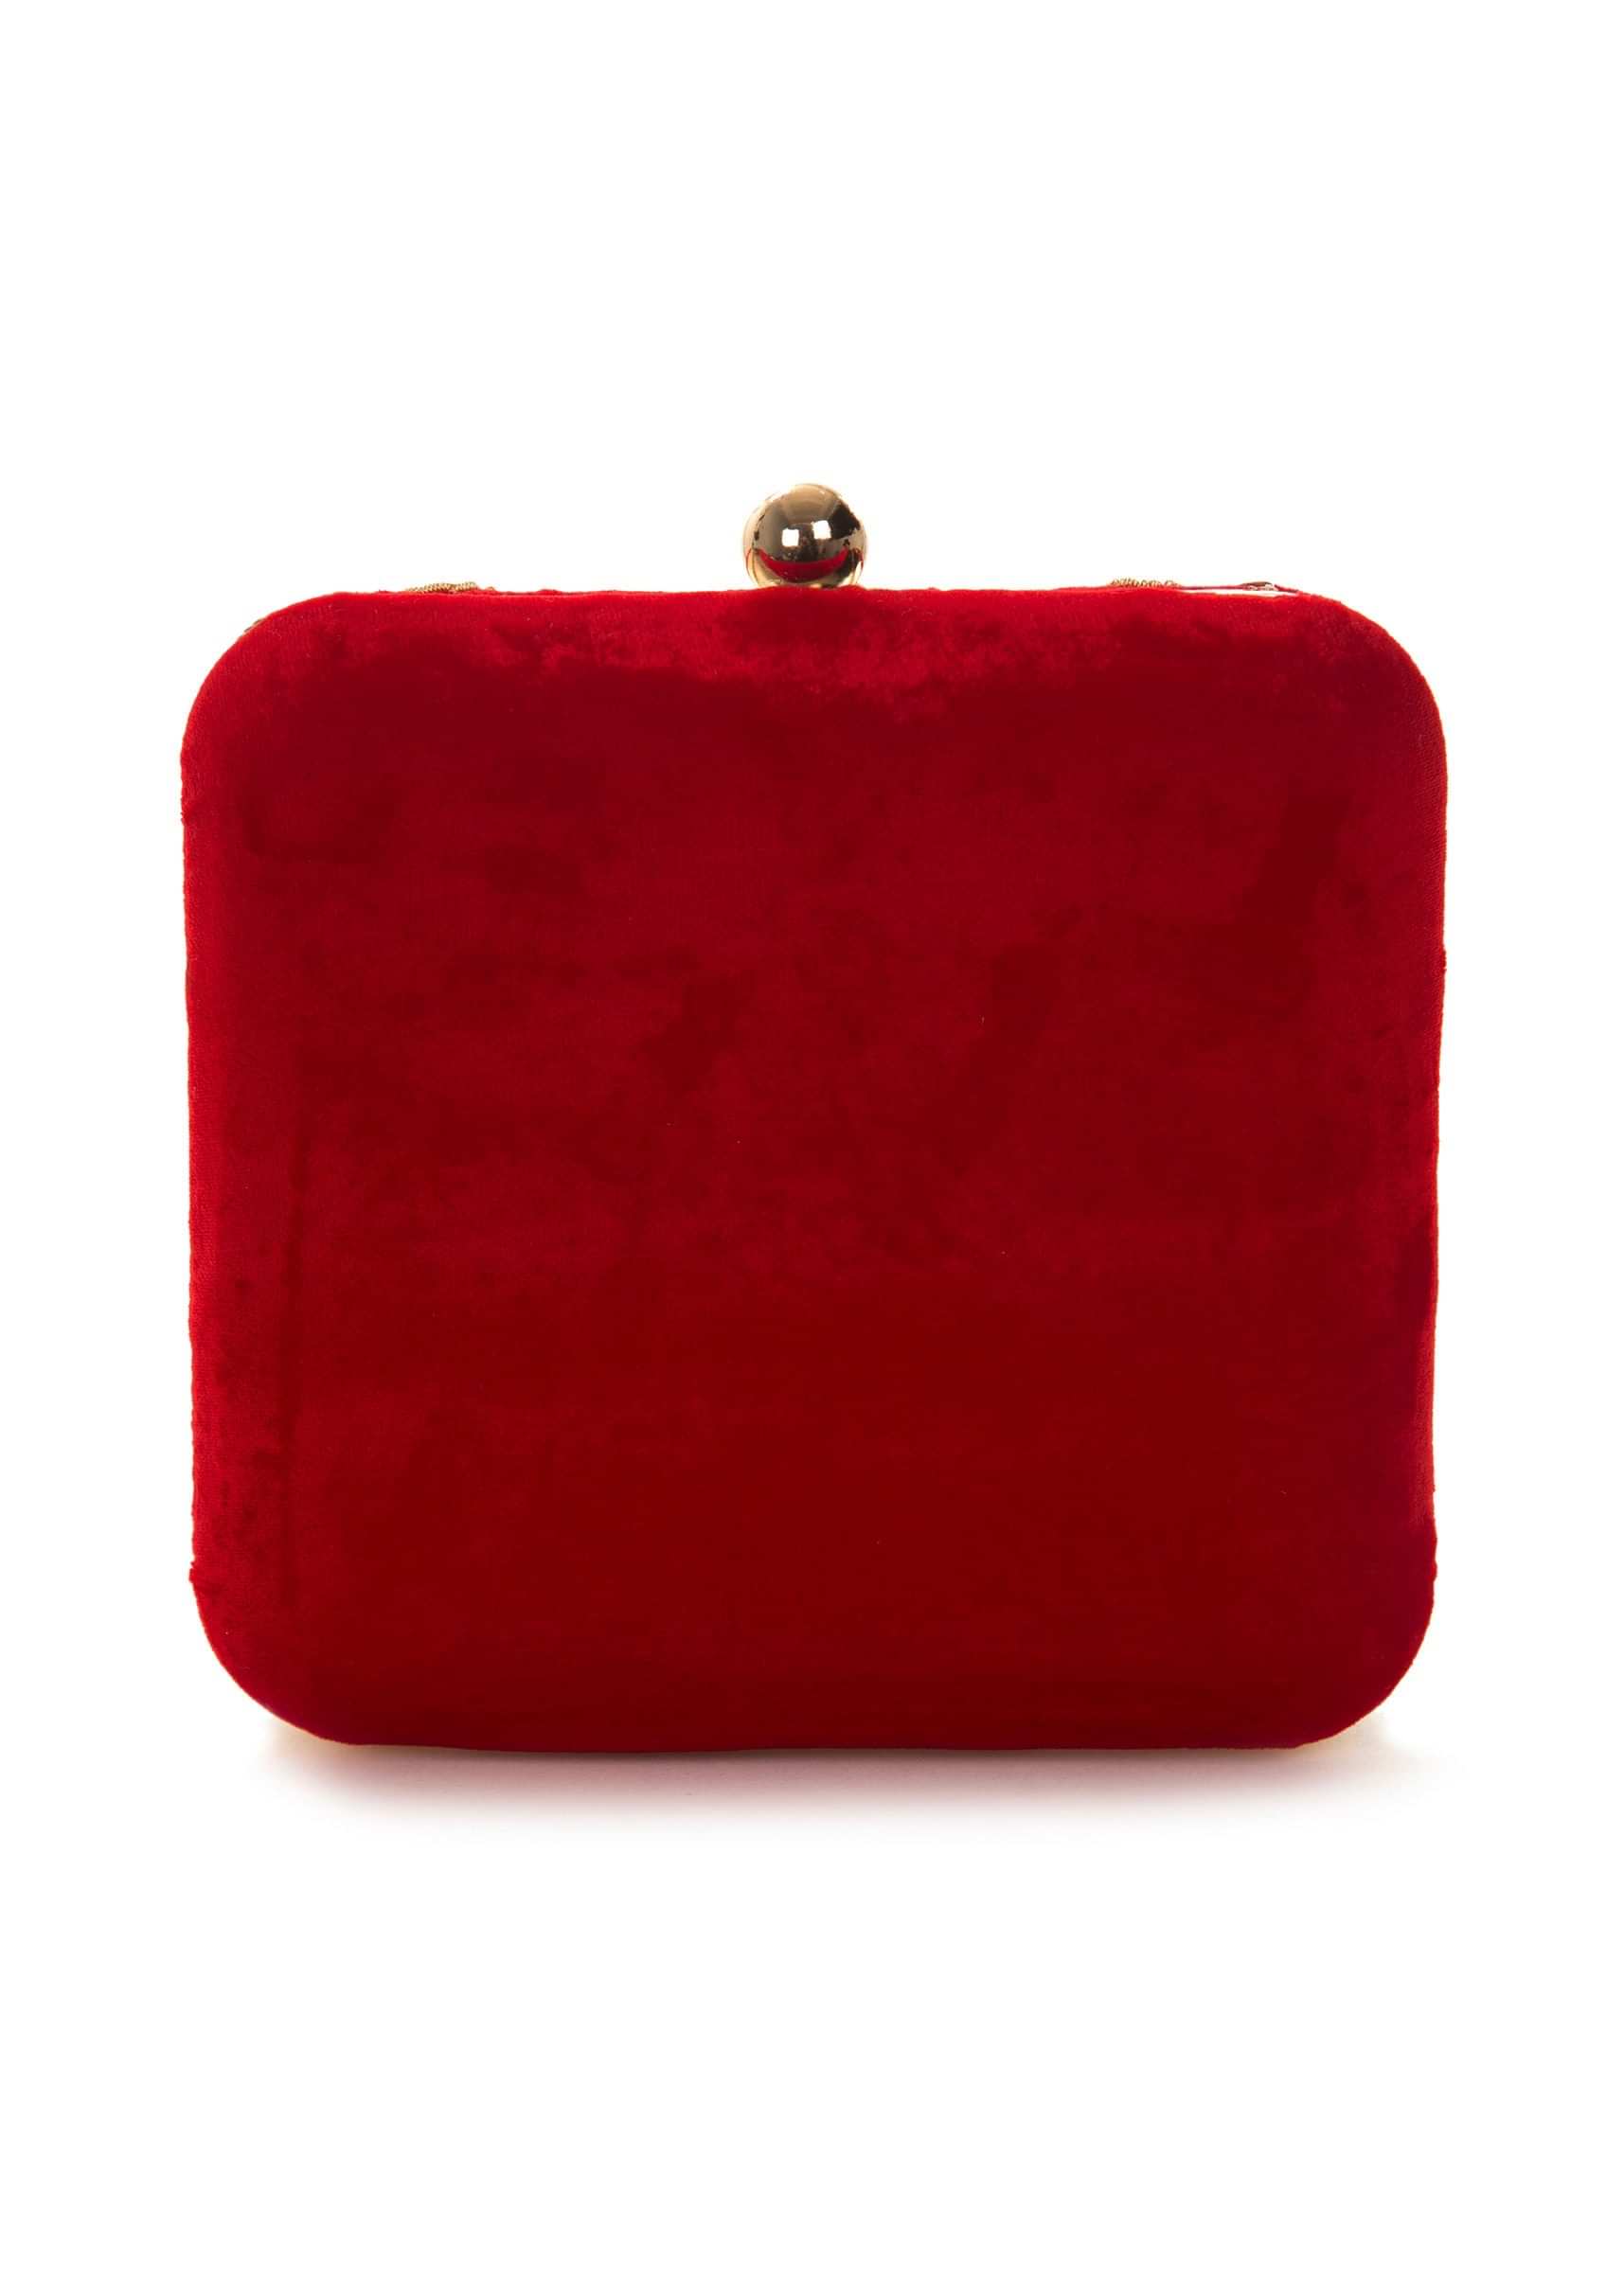 Red clutch embroidered in cutdana and sequin work only on Kalki